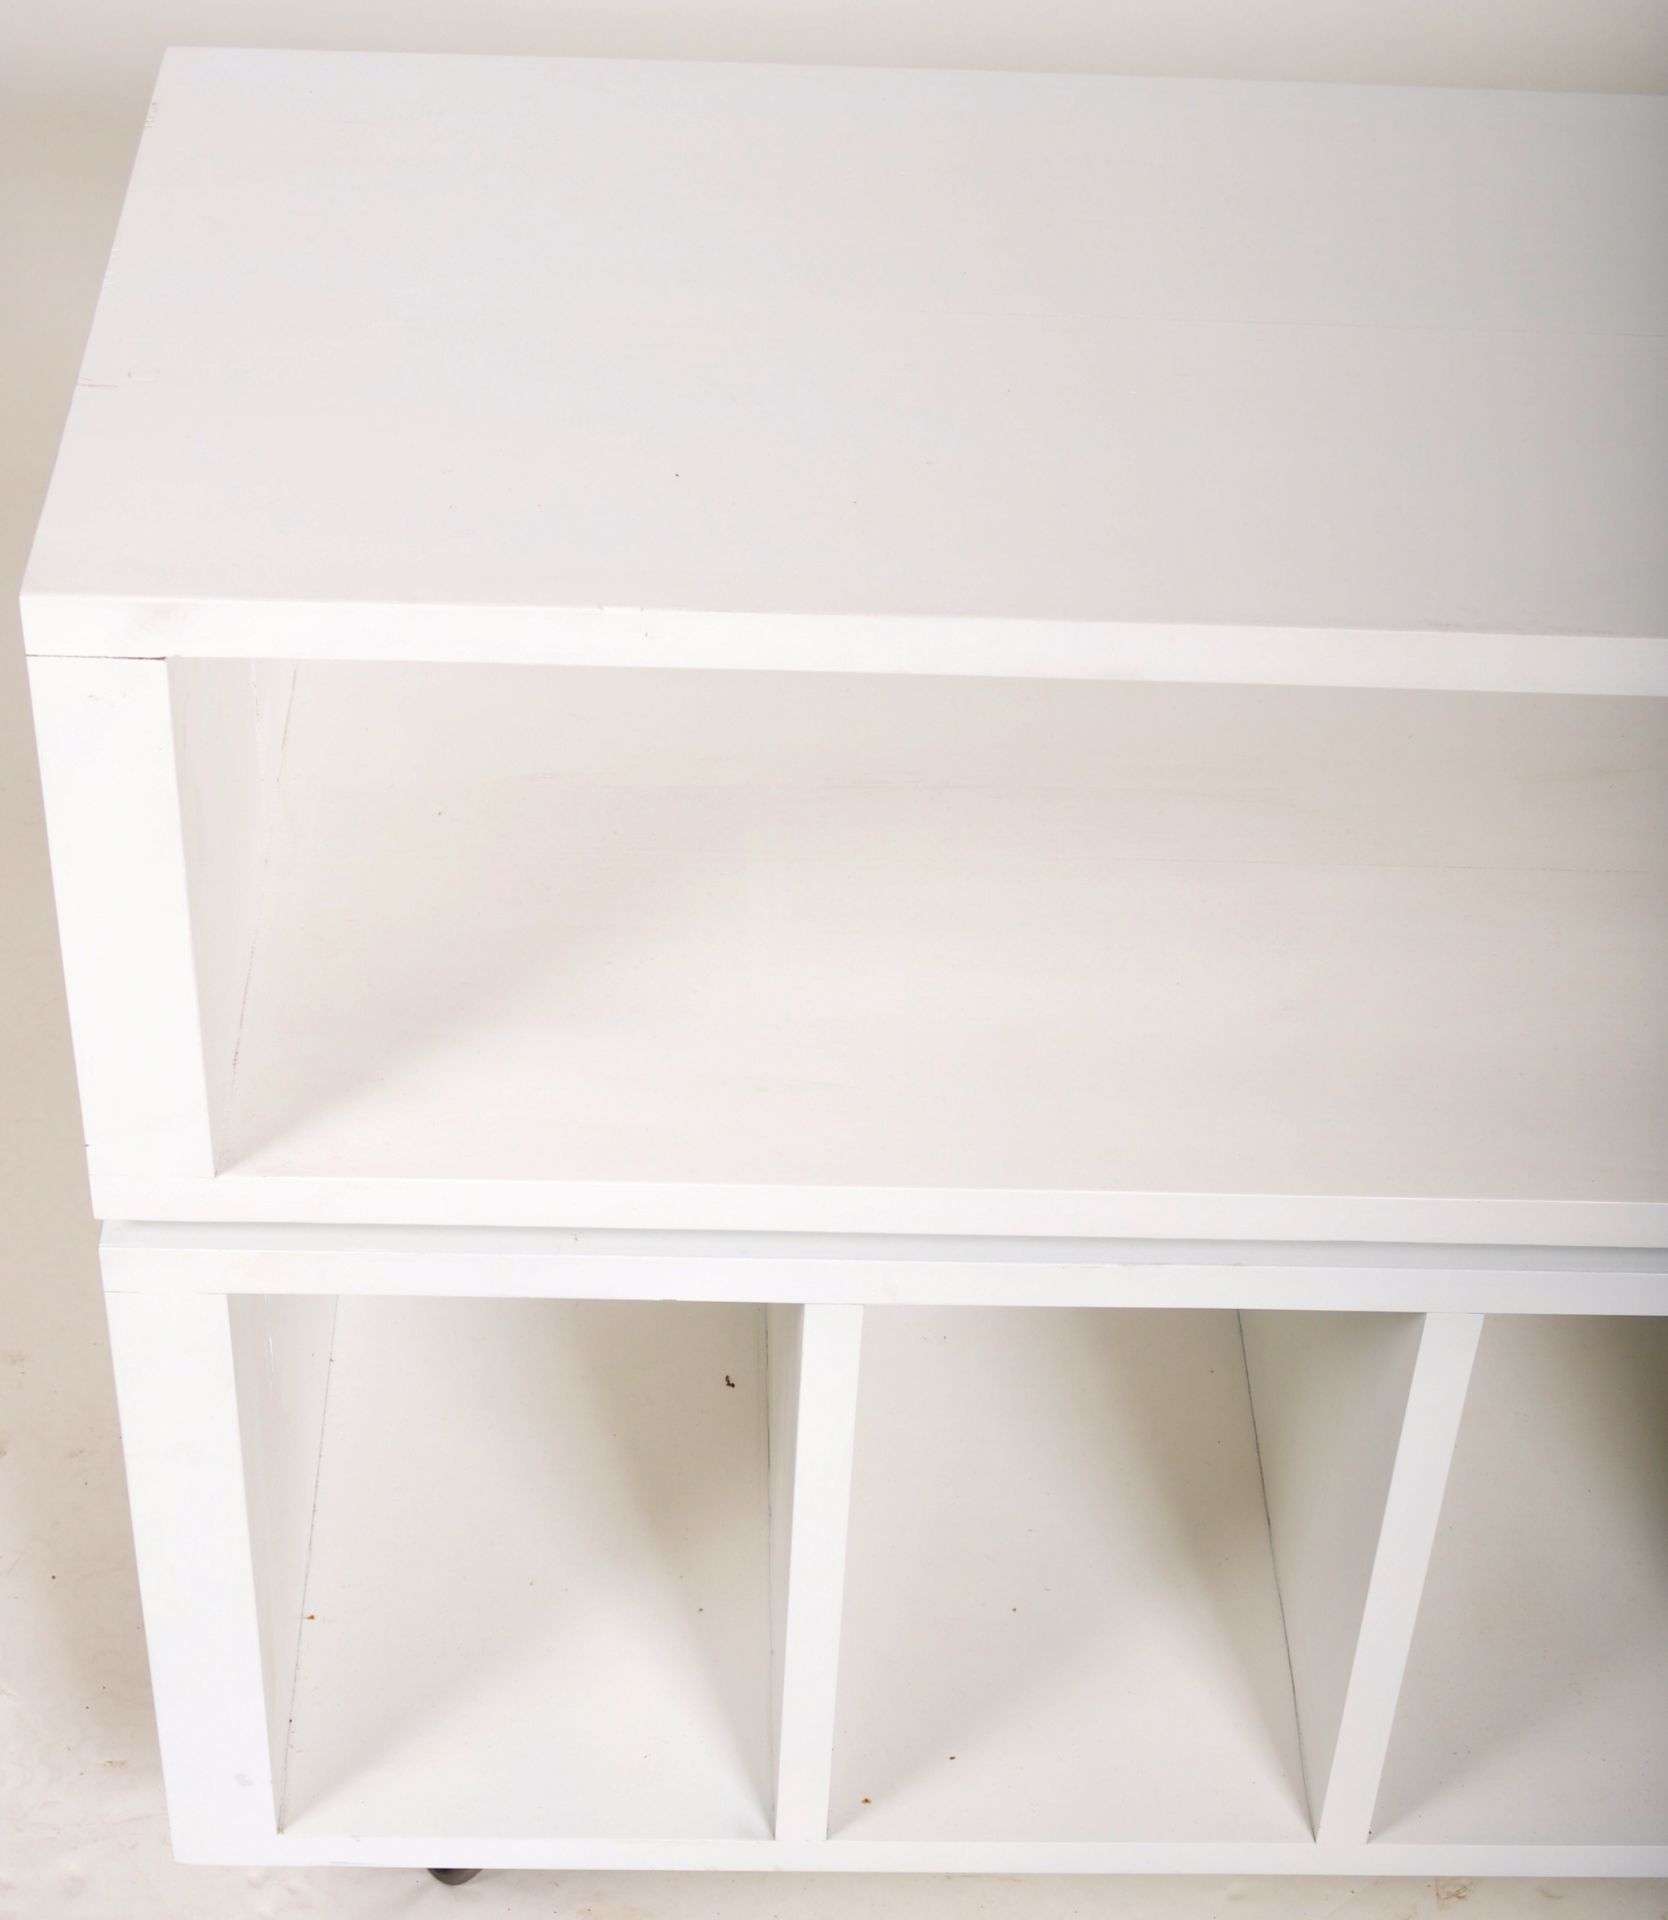 CONTEMPORARY MODERNIST MINIMALIST WHITE LAMINATED SIDEBOARD - Image 3 of 5